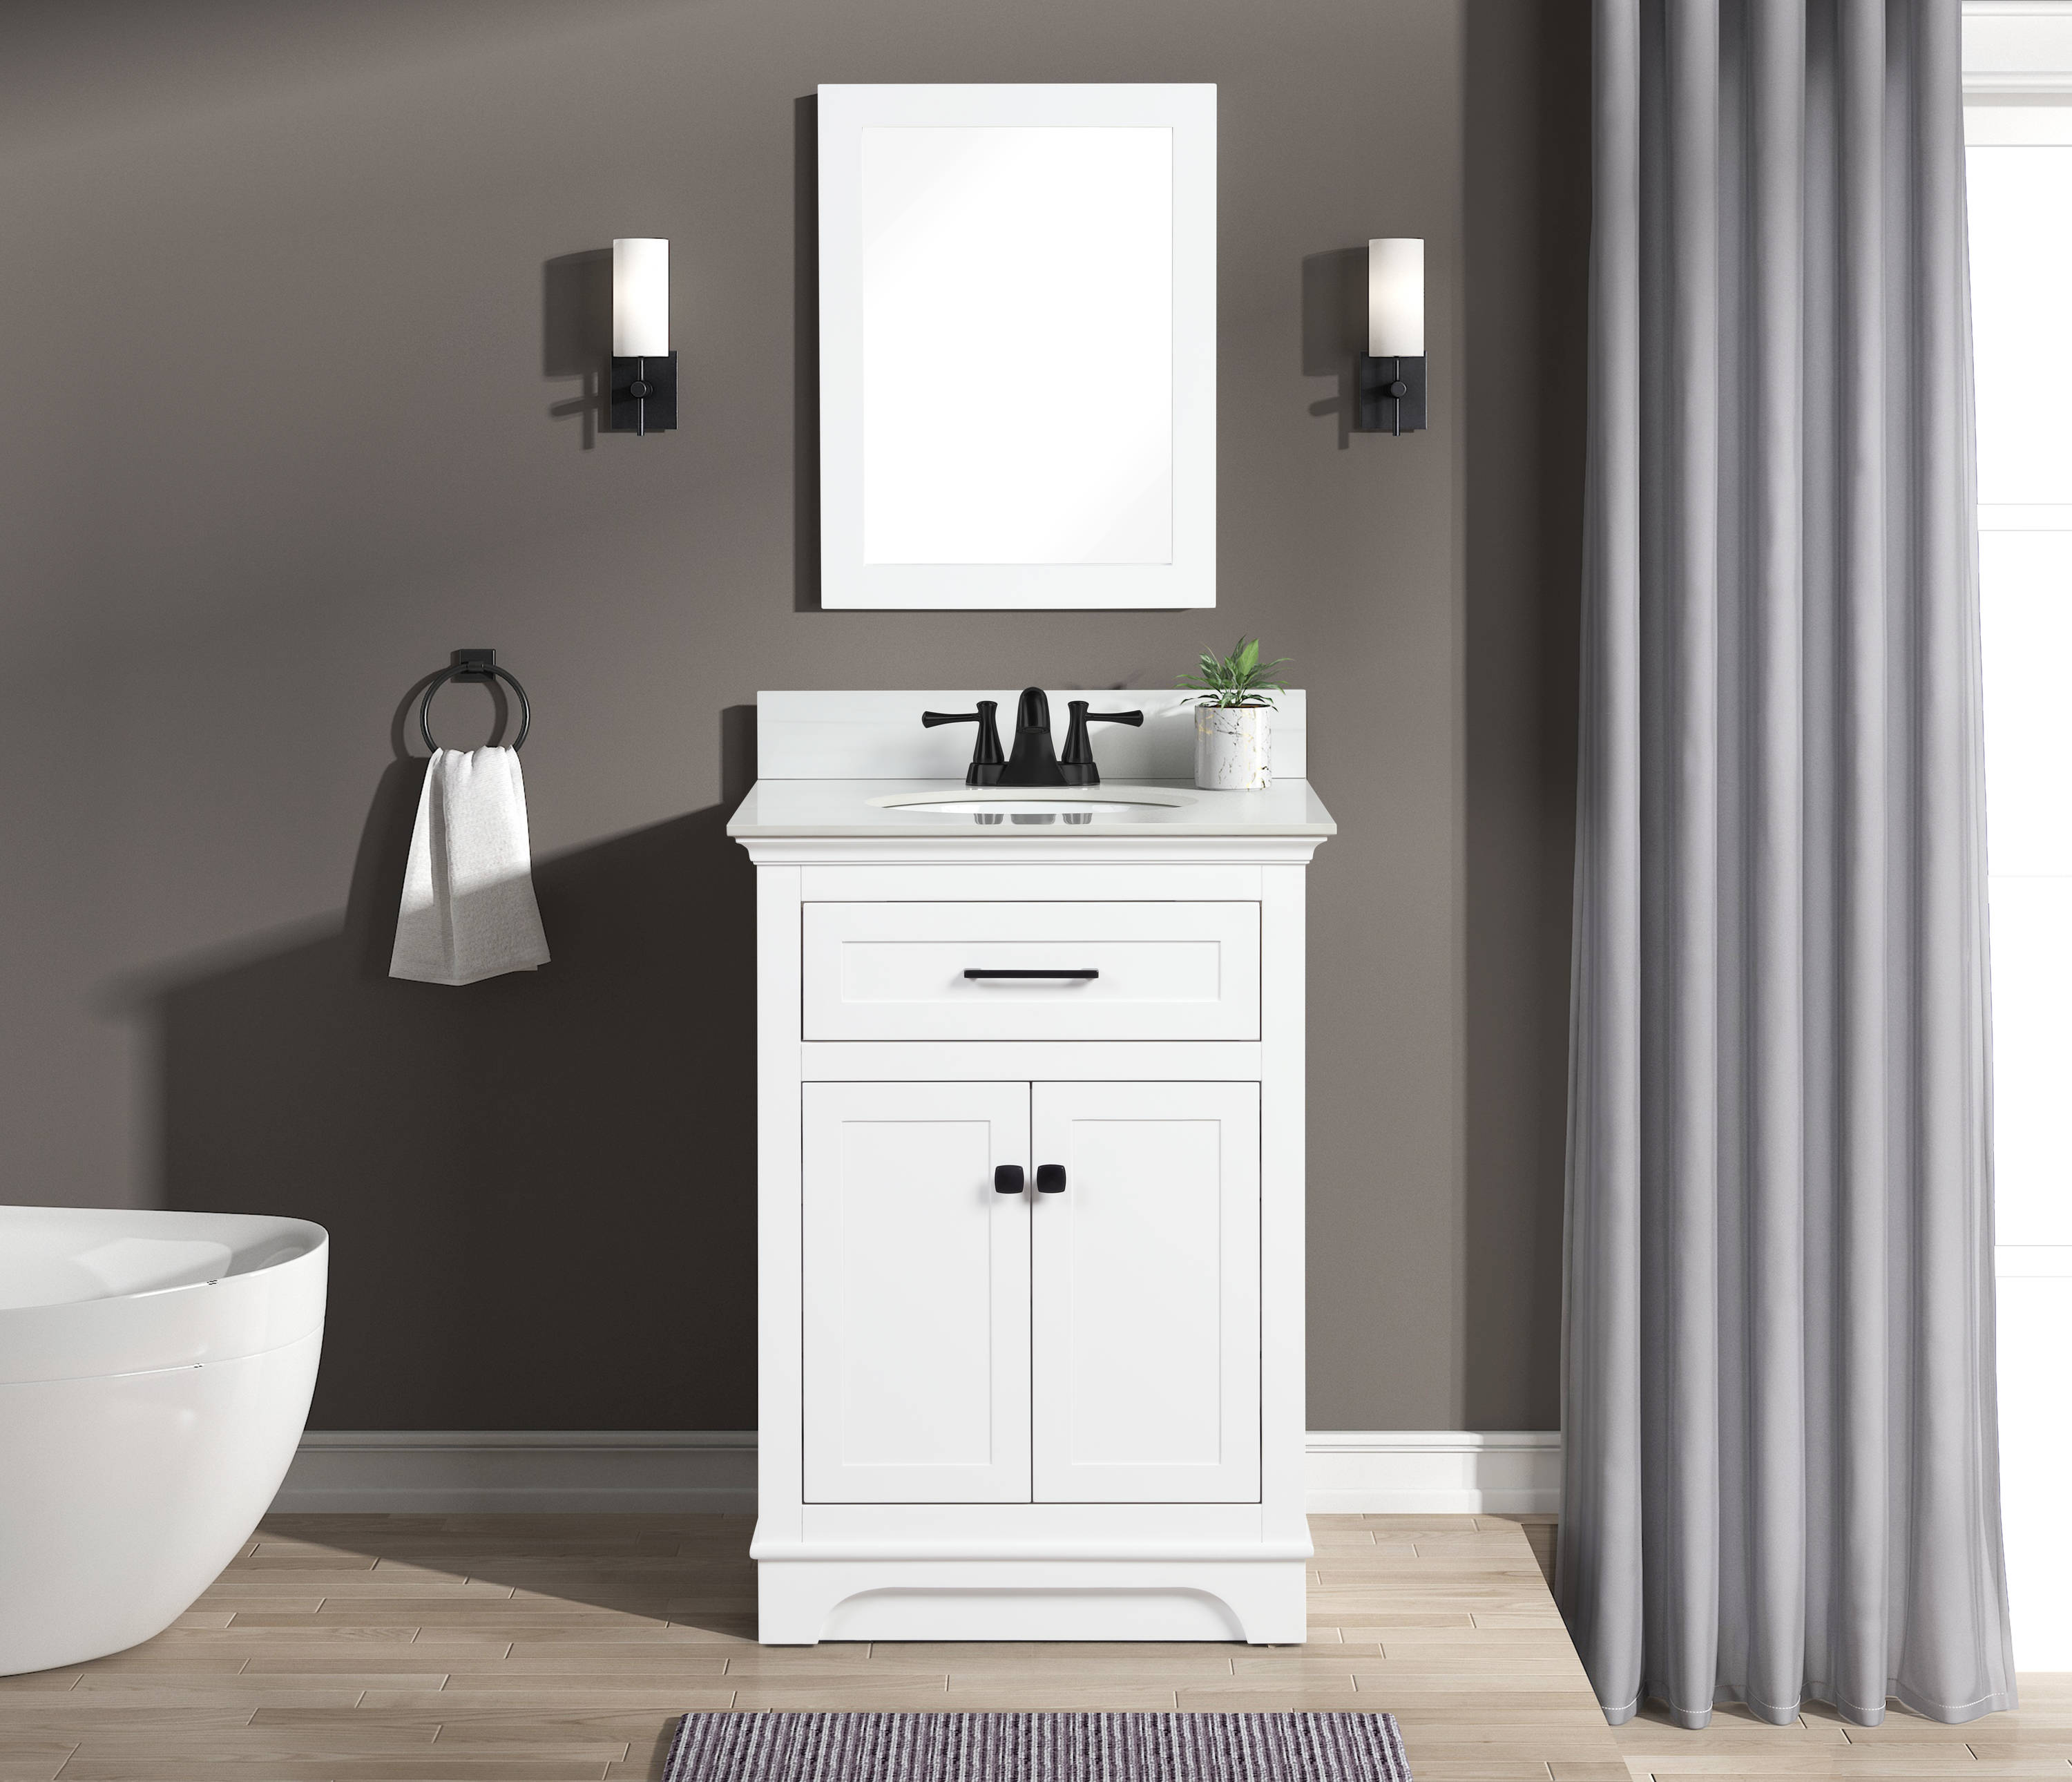 24" Bathroom Vanity Sink Combo Wall Mounted Natural Cabinet Mirror Faucet Set 